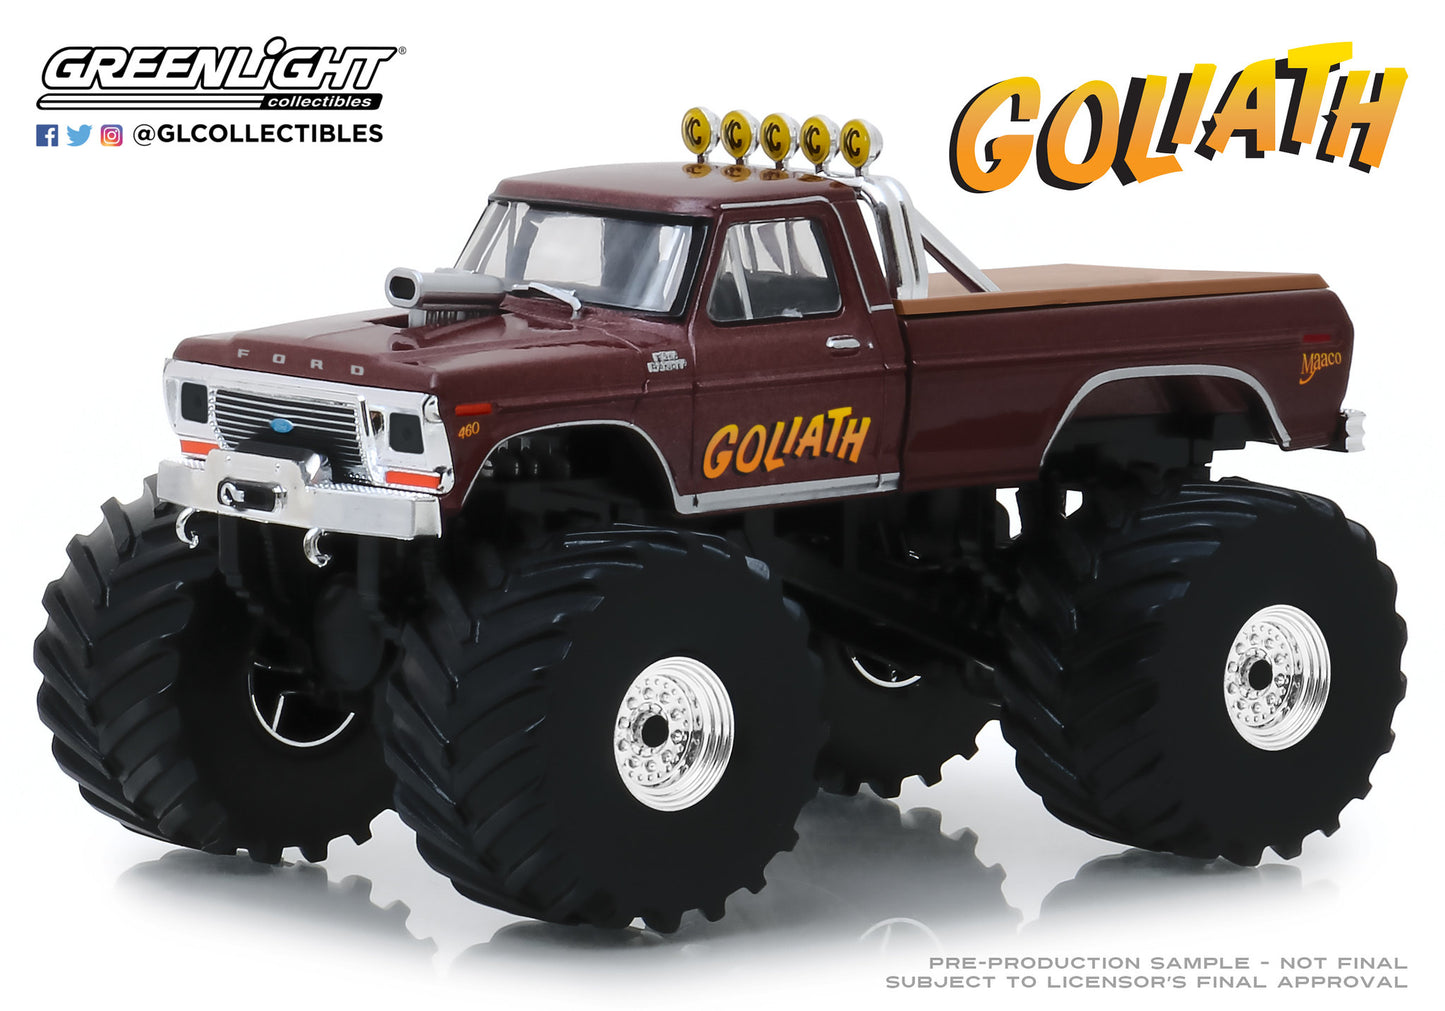 GreenLight 1:43 Kings of Crunch - Goliath - 1979 Ford F-250 Monster Truck (with 66-Inch Tires) 88023